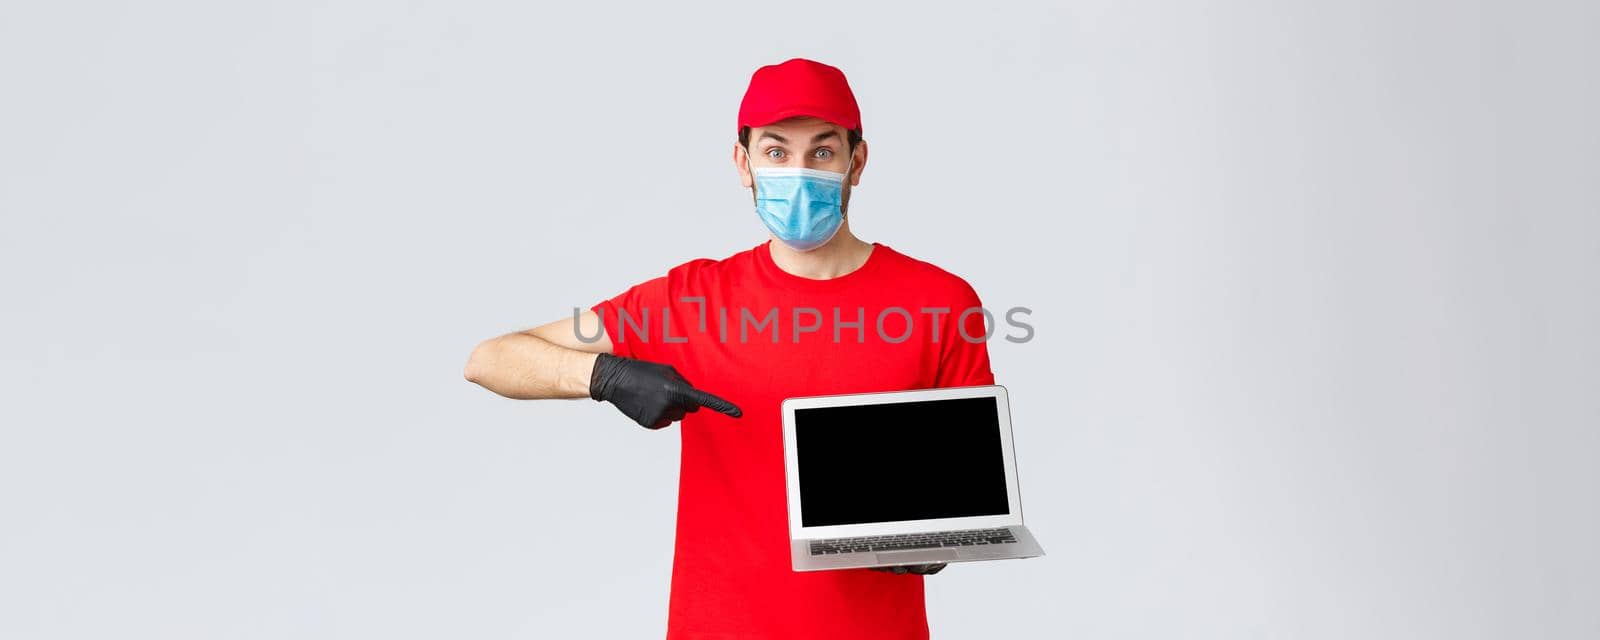 Customer support, covid-19 delivery packages, online orders processing concept. Enthusiastic courier in red uniform, gloves and face mask from coronavirus, pointing at laptop screen.